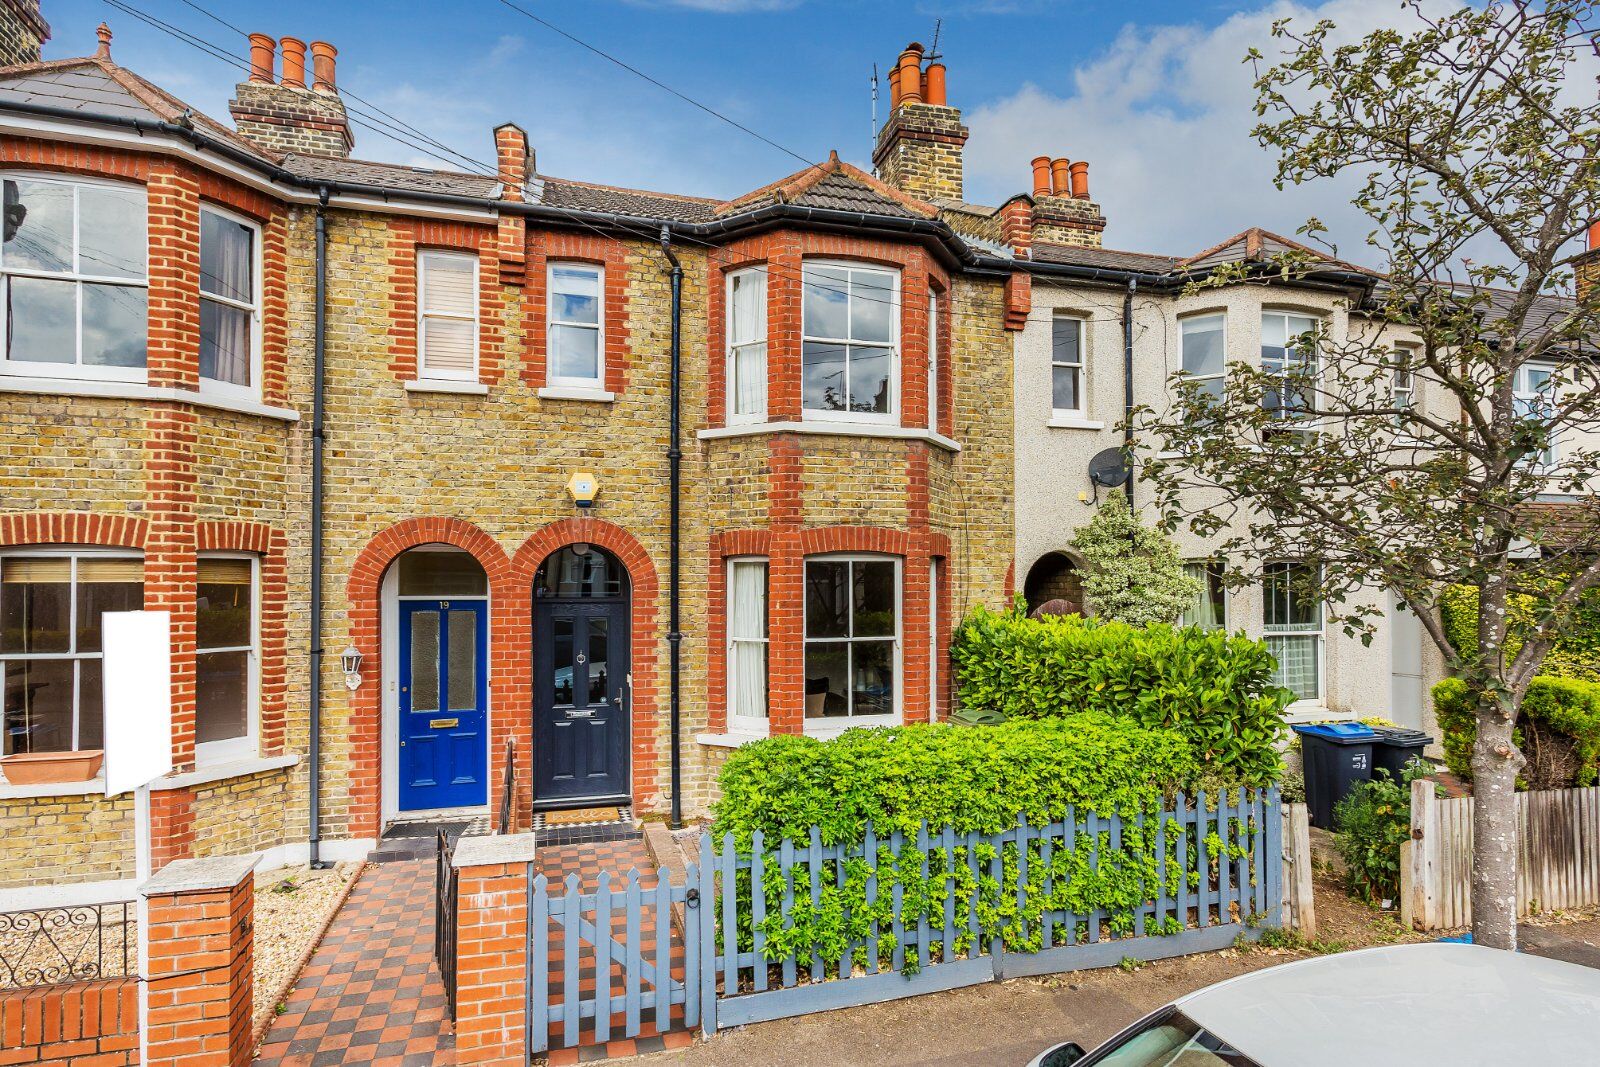 4 bedroom mid terraced house for sale Chestnut Road, London, SW20, main image